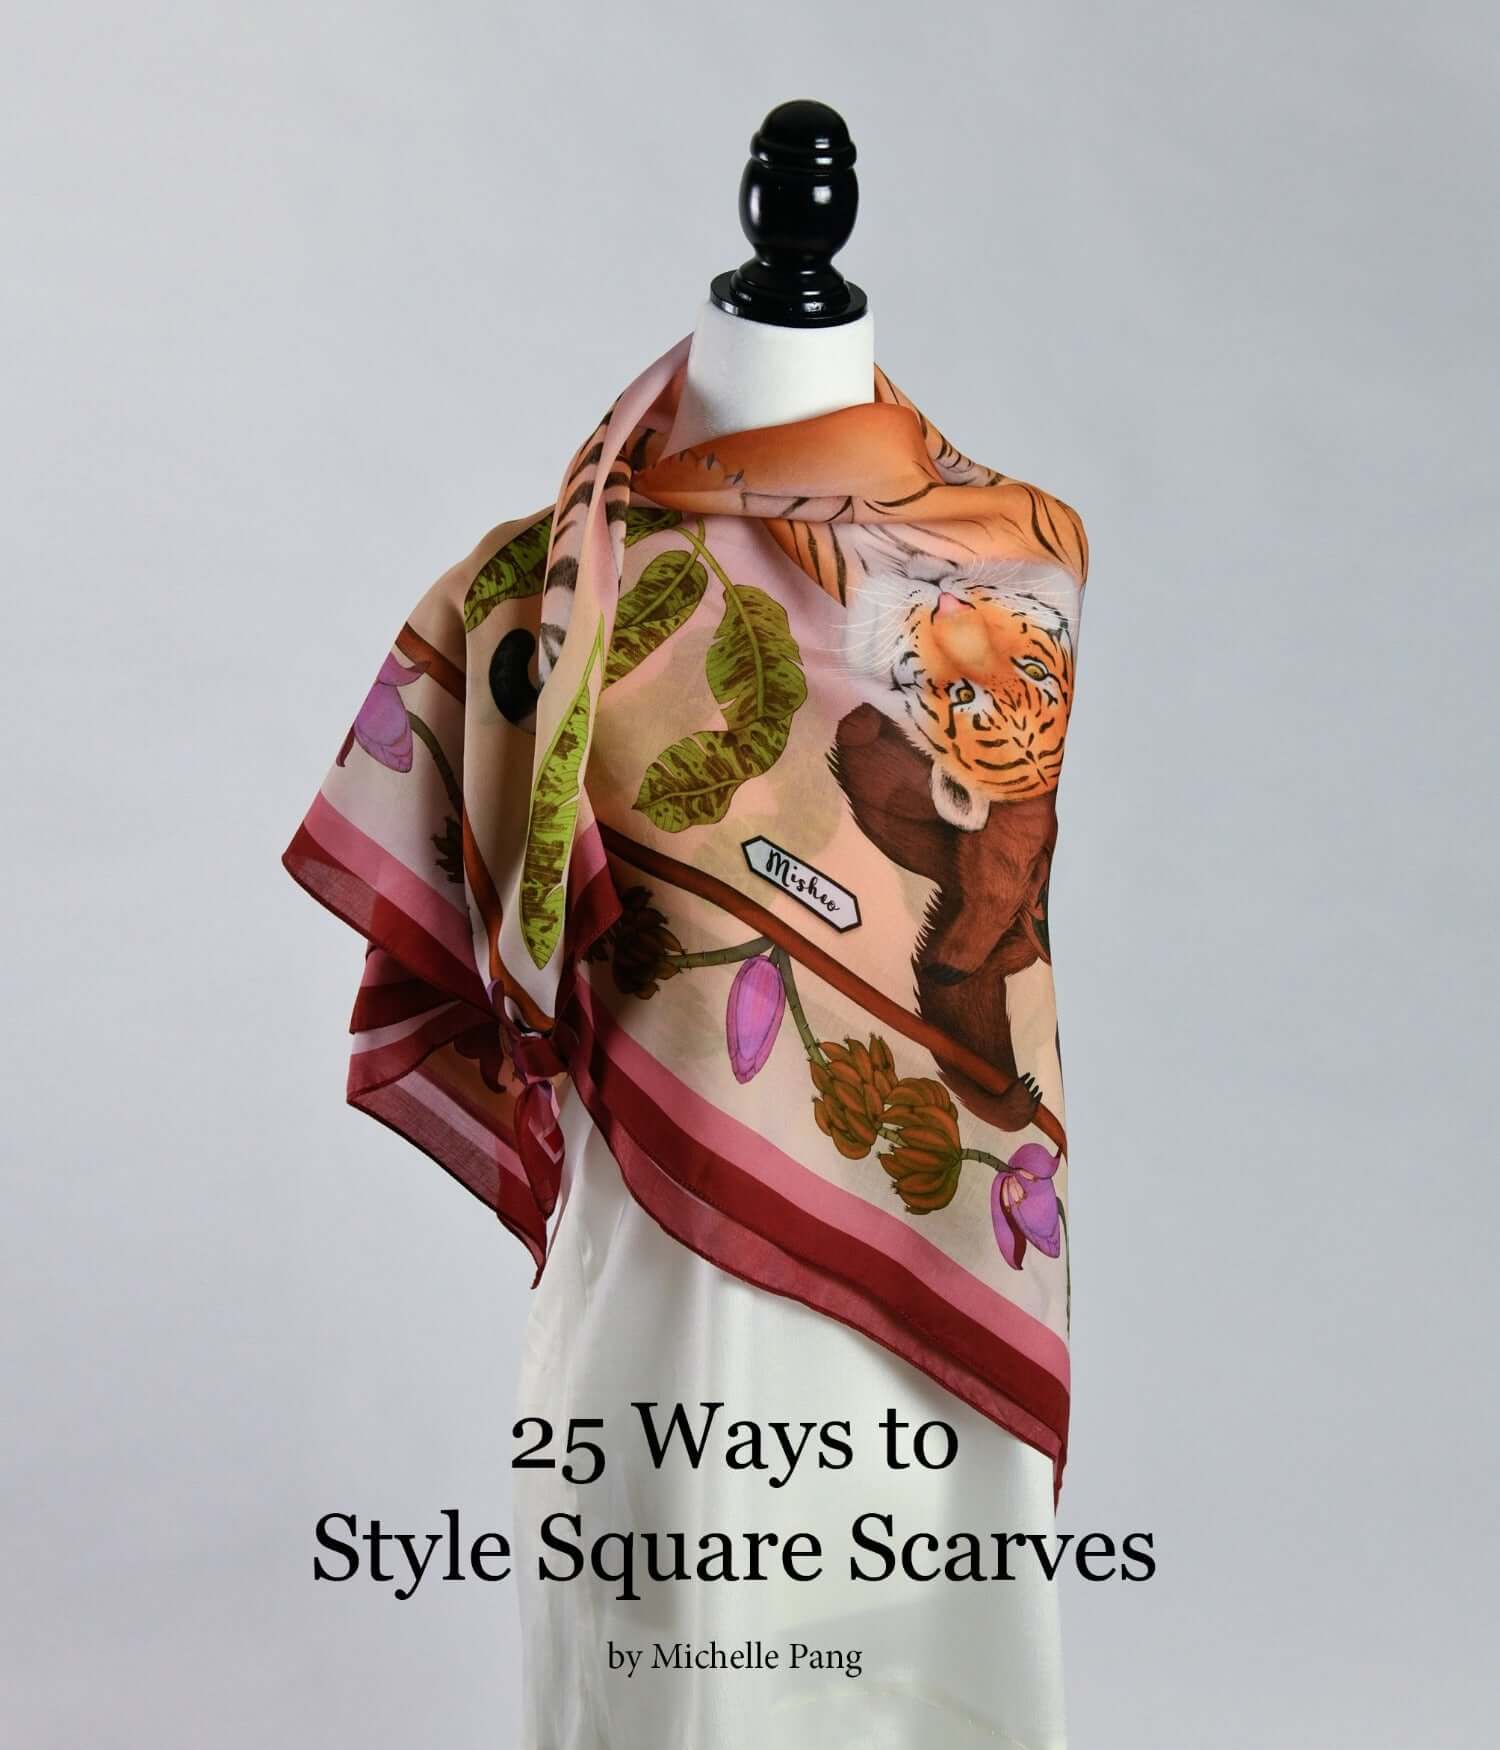 25 Ways to Style Square Scarves